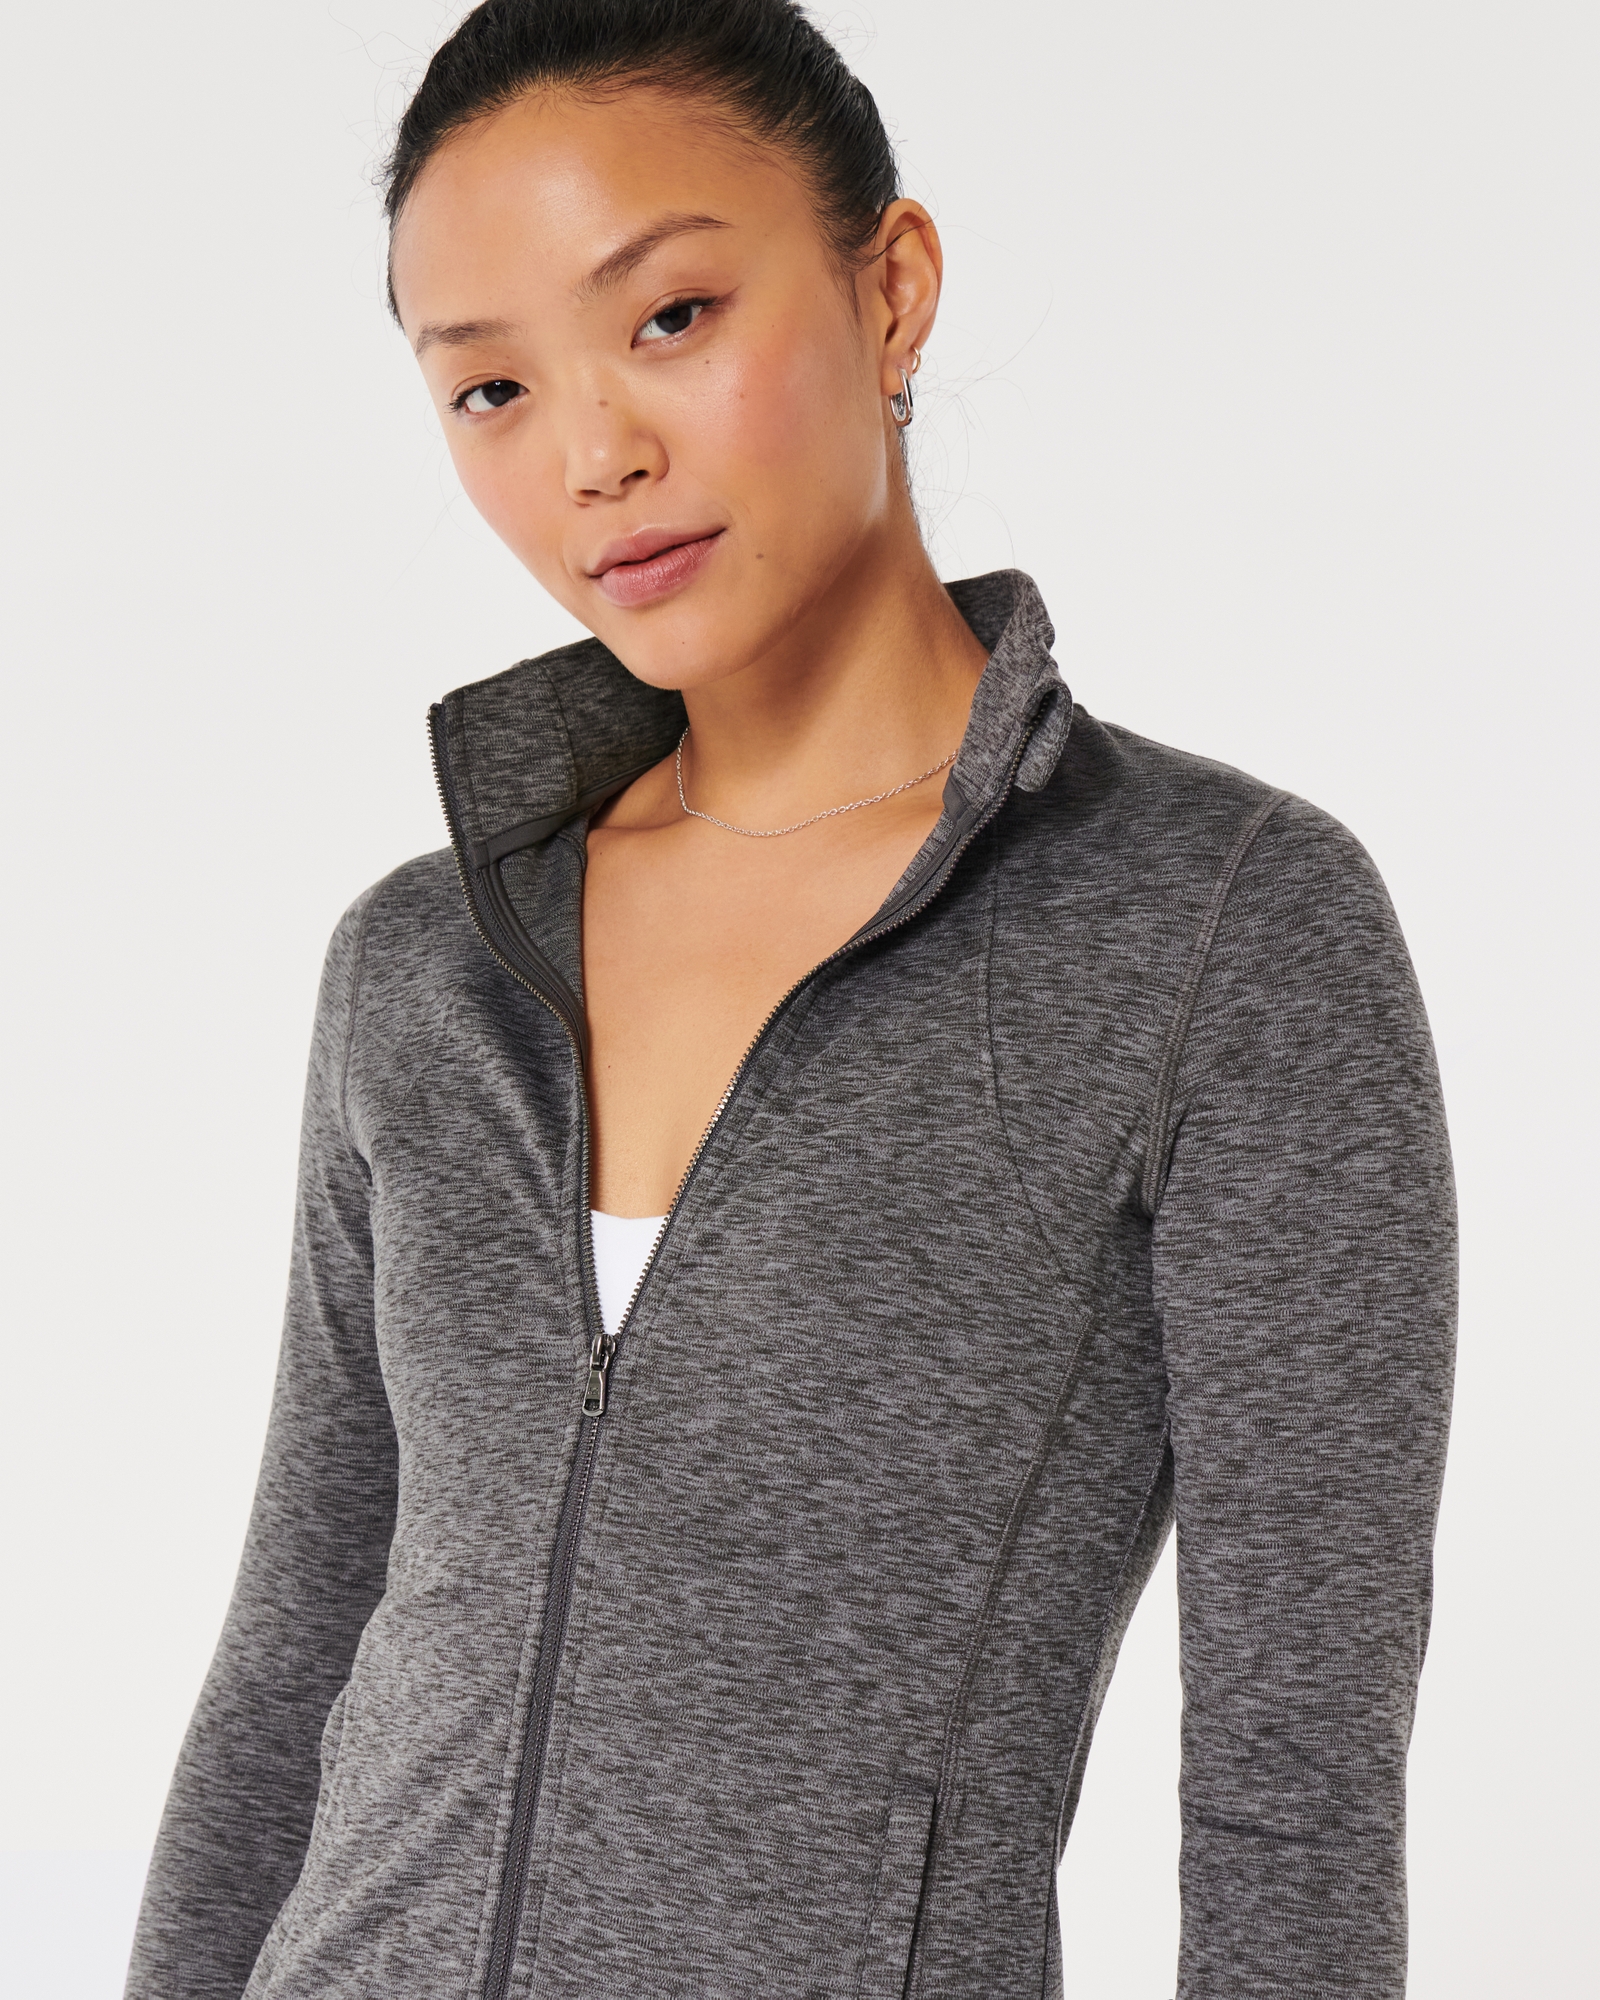 Women's Gilly Hicks Active Recharge Zip-Up Jacket, Women's Workout Sets